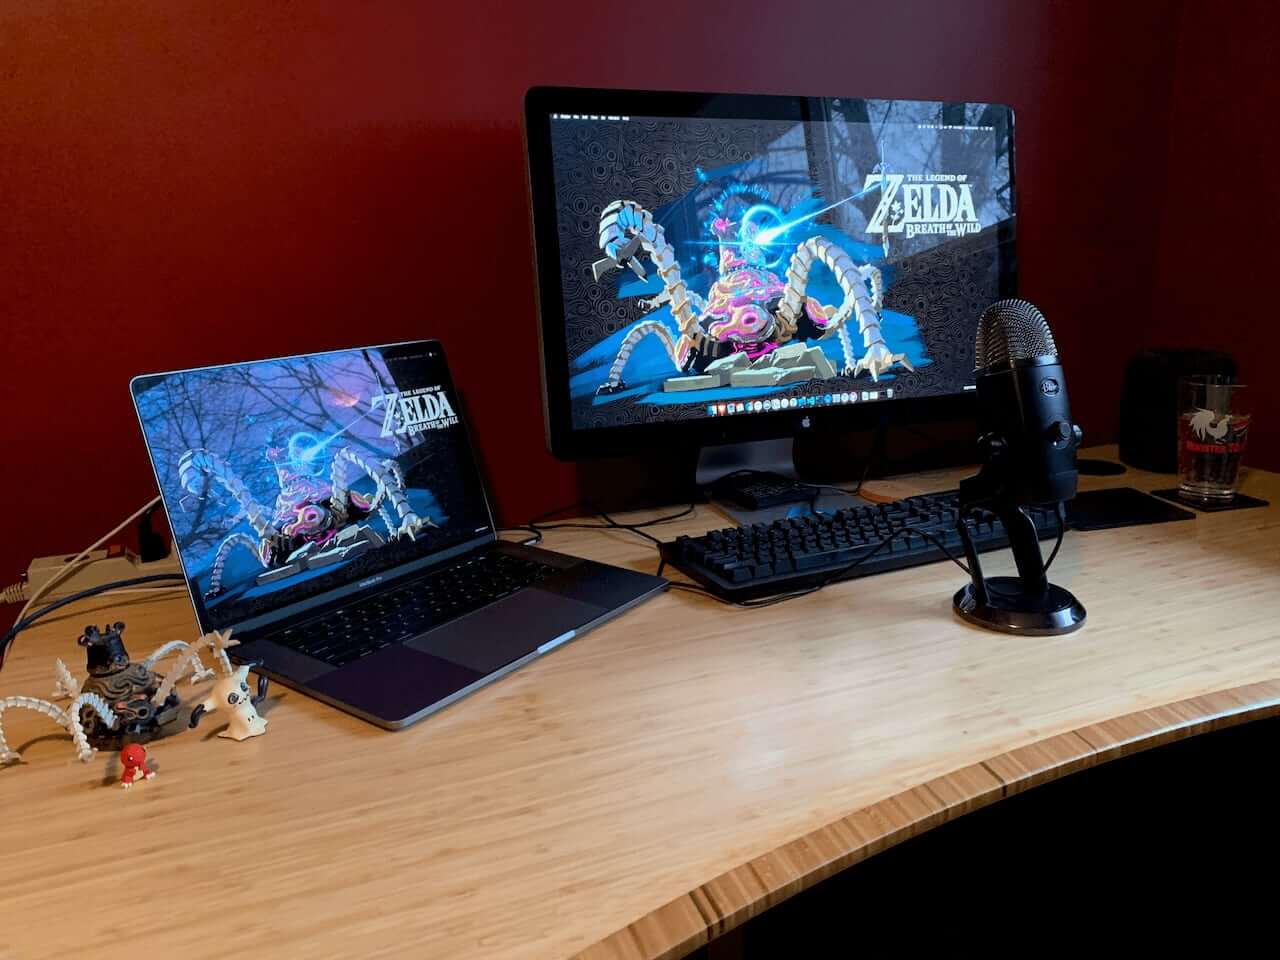 Image of Nick's work from home setup